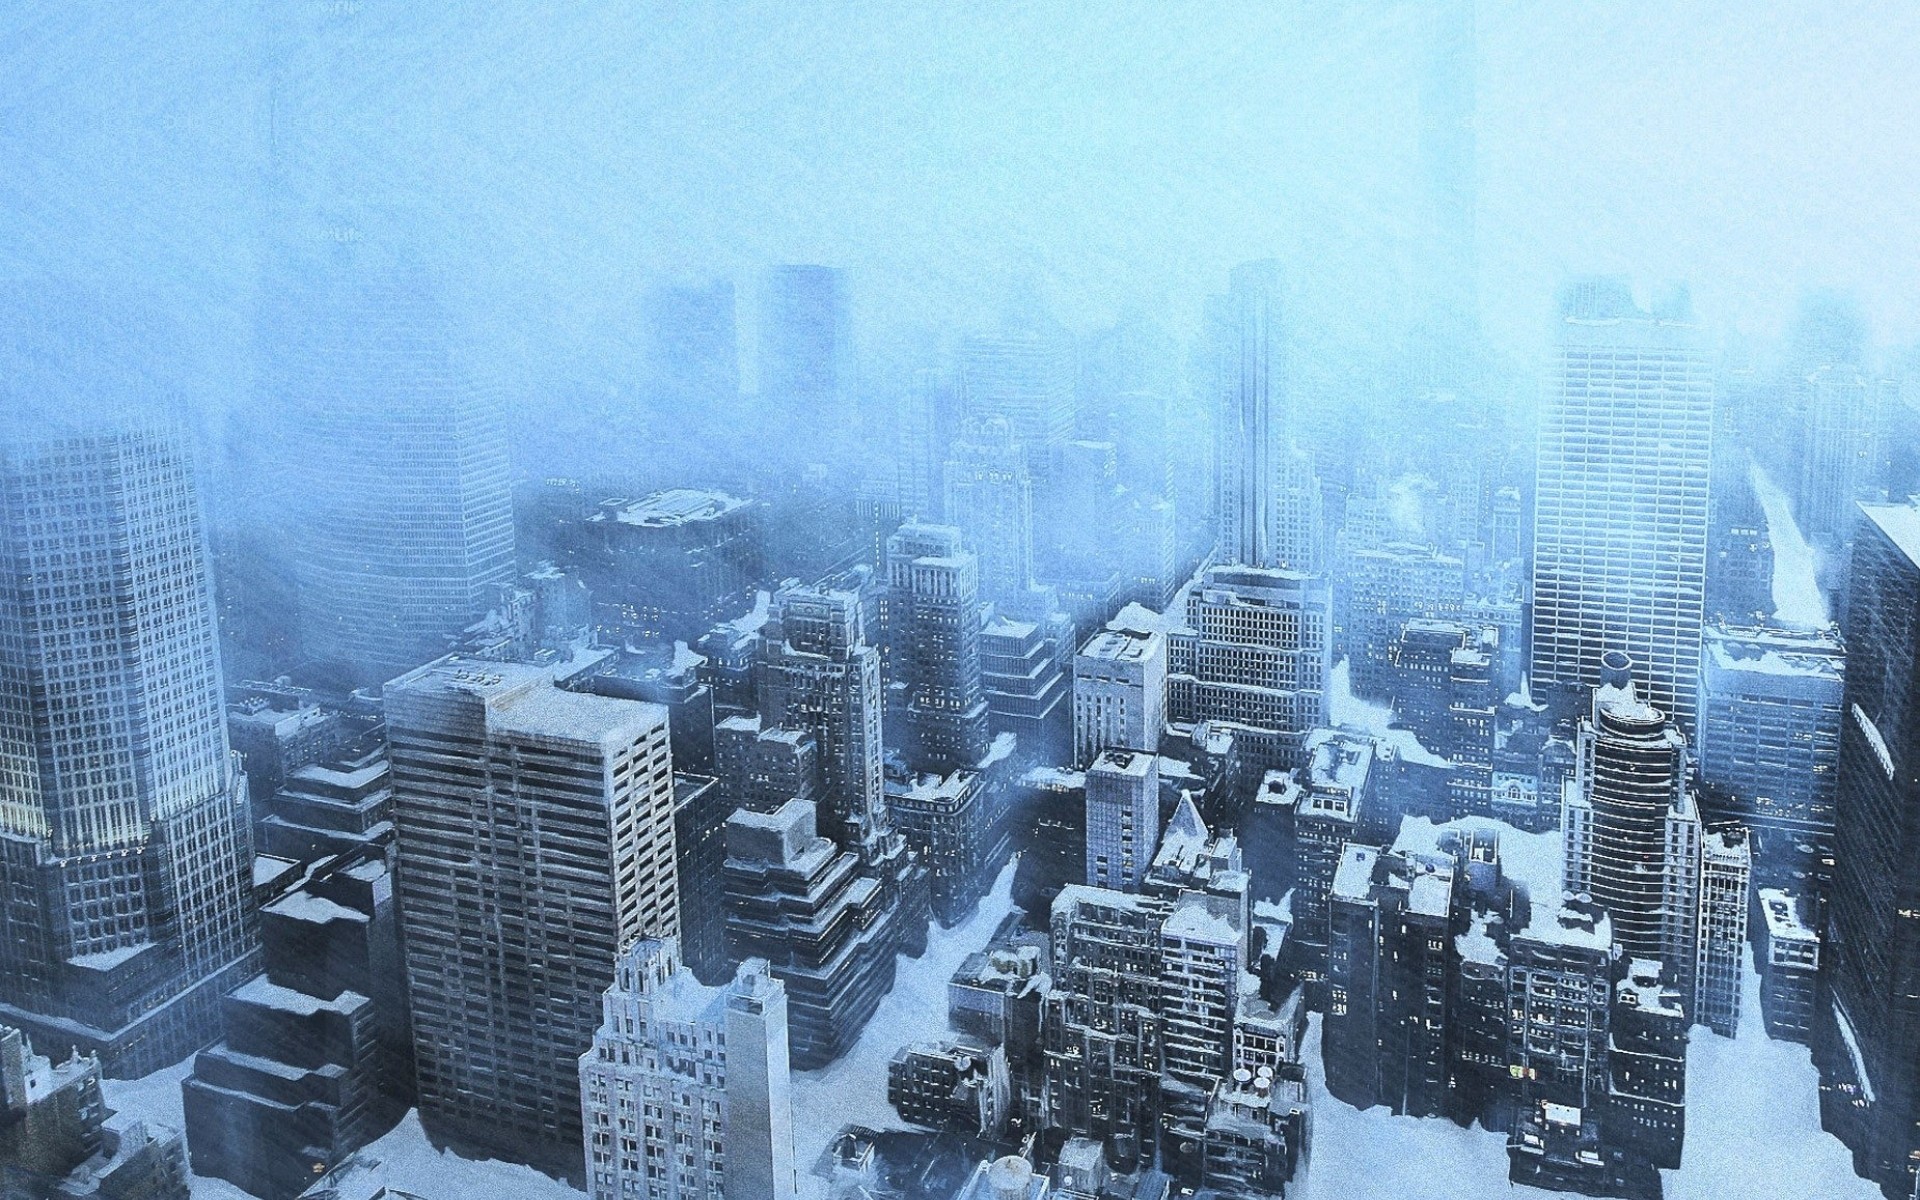 Snow falling on skyscrapers, New York City wallpaper download. Wallpaper, picture, photo